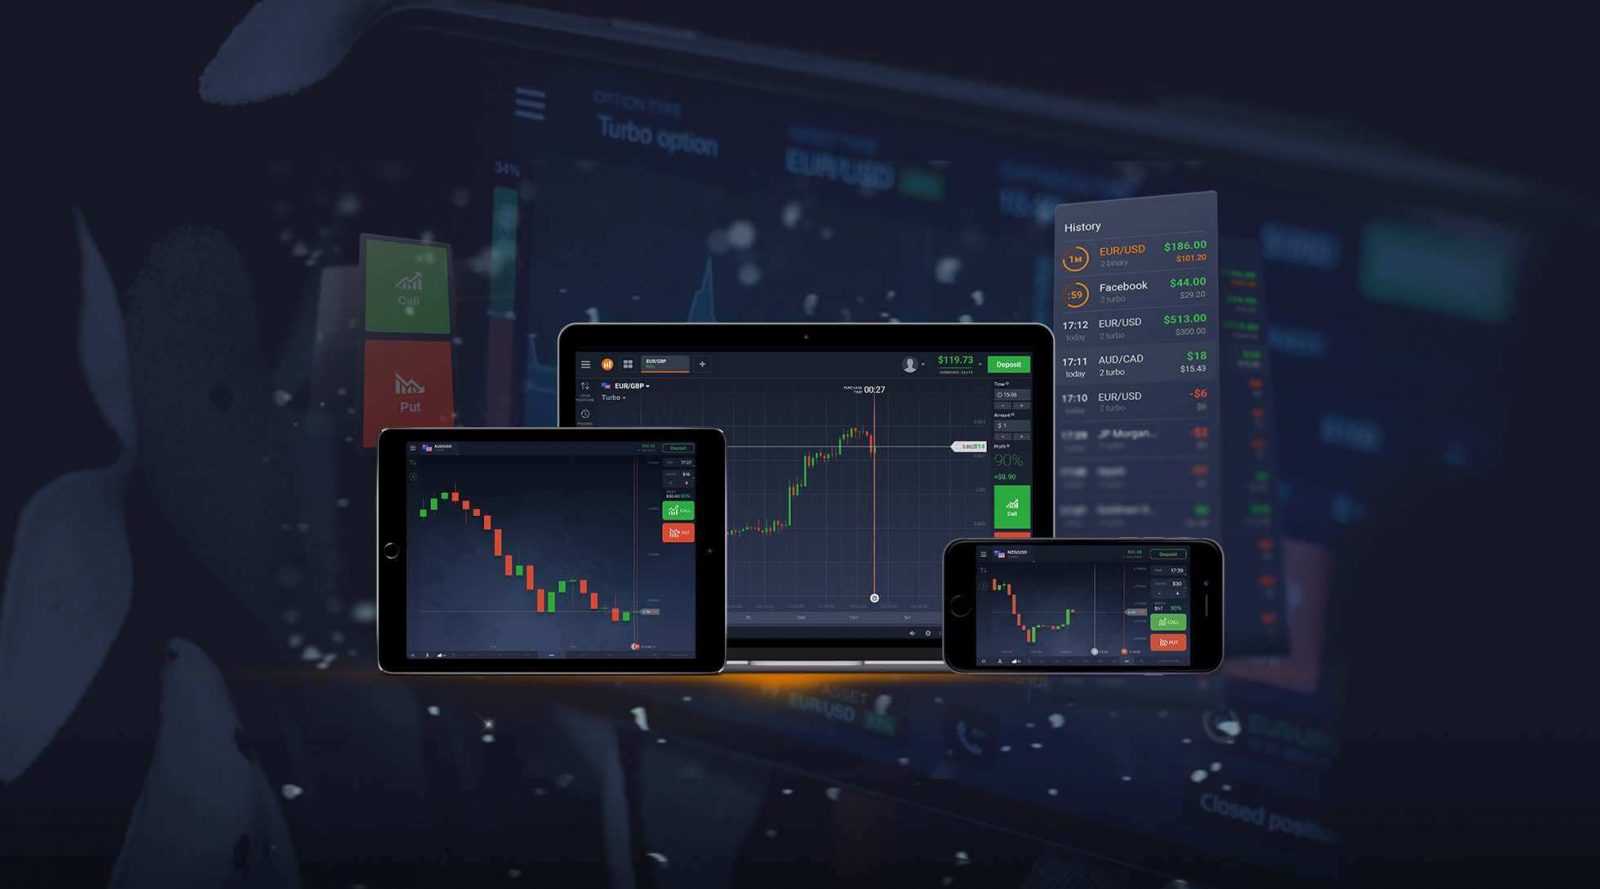 Easy To Trade With The Help Of The Desktop Platform